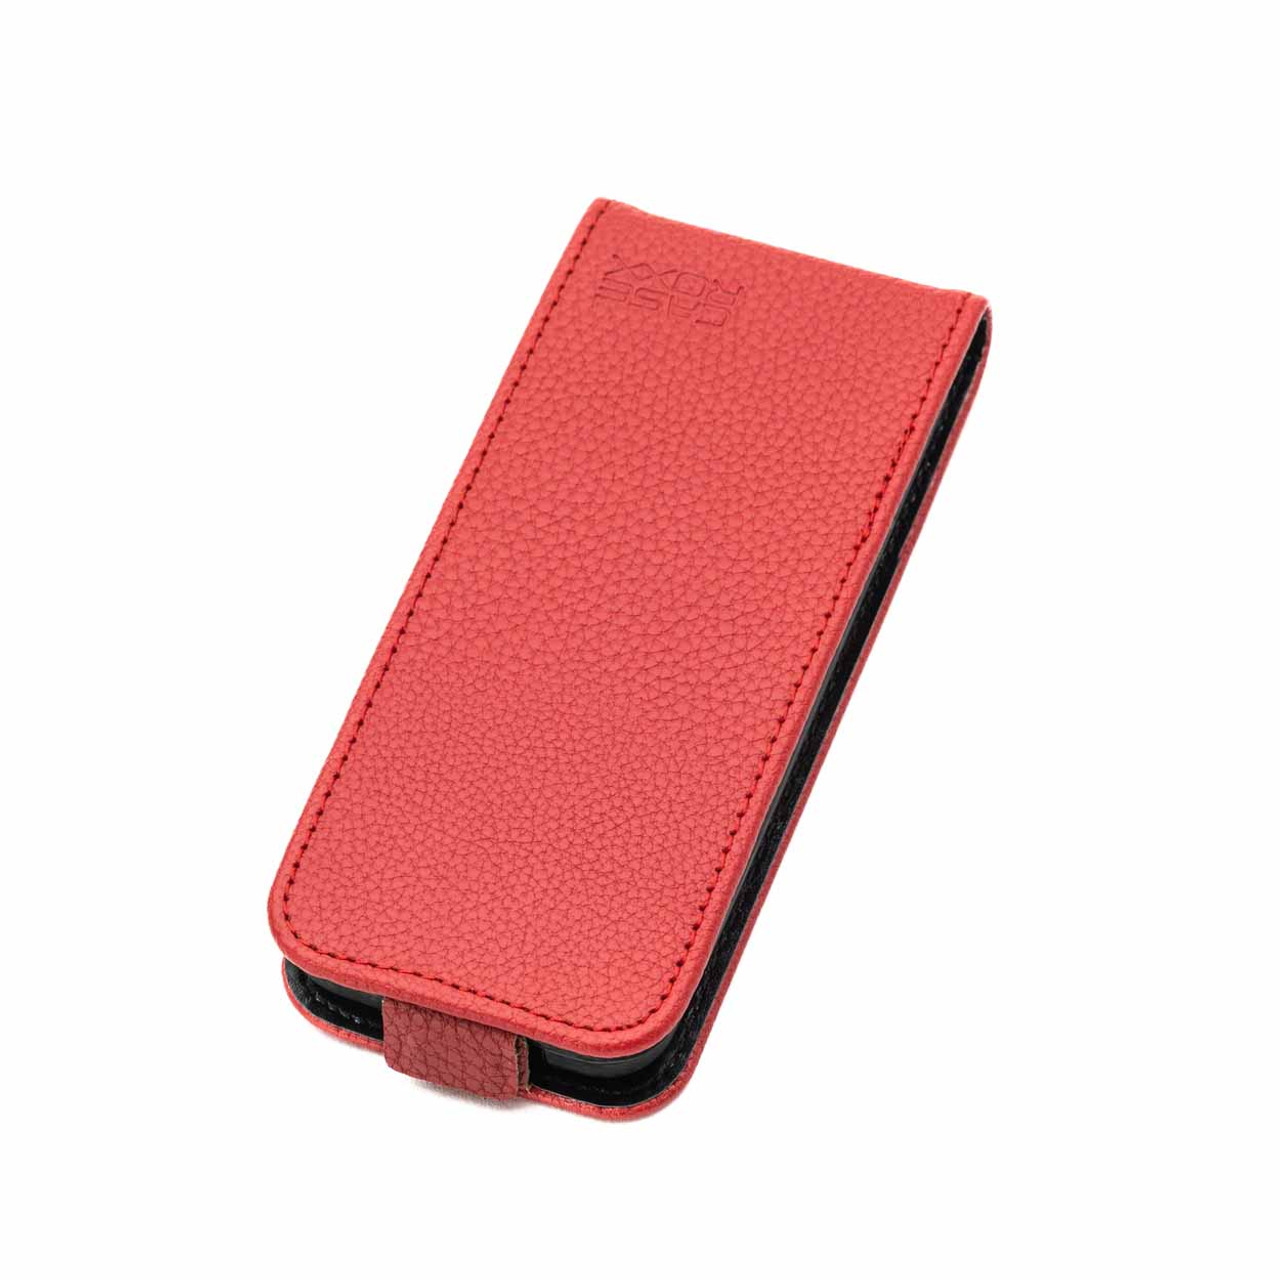 Carrying Case for BlindShell Classic Cell Phone - RED